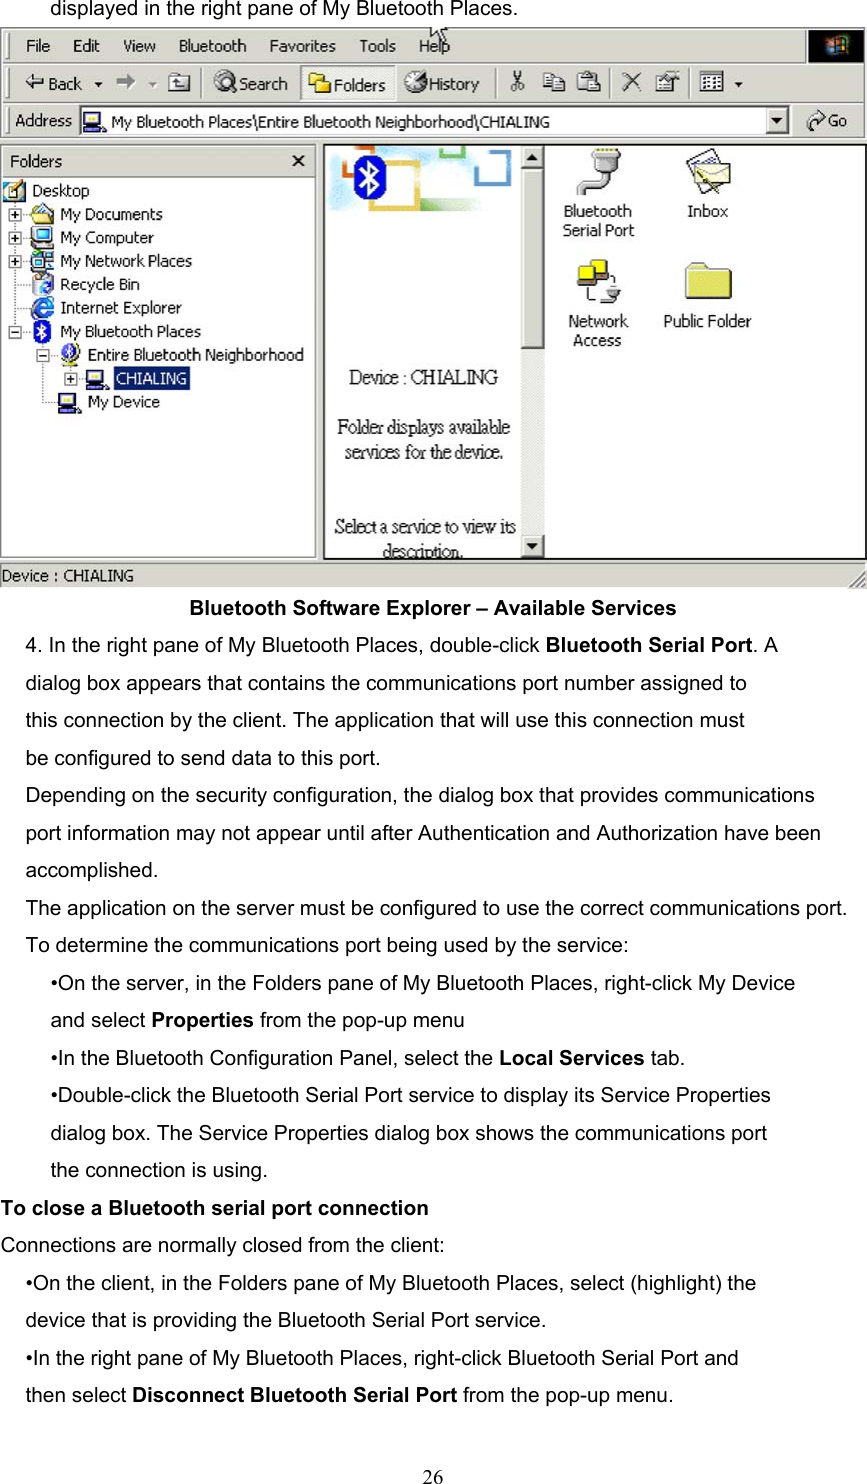  26 displayed in the right pane of My Bluetooth Places.  Bluetooth Software Explorer – Available Services 4. In the right pane of My Bluetooth Places, double-click Bluetooth Serial Port. A dialog box appears that contains the communications port number assigned to this connection by the client. The application that will use this connection must be configured to send data to this port. Depending on the security configuration, the dialog box that provides communications port information may not appear until after Authentication and Authorization have been accomplished. The application on the server must be configured to use the correct communications port. To determine the communications port being used by the service: •On the server, in the Folders pane of My Bluetooth Places, right-click My Device and select Properties from the pop-up menu •In the Bluetooth Configuration Panel, select the Local Services tab. •Double-click the Bluetooth Serial Port service to display its Service Properties dialog box. The Service Properties dialog box shows the communications port the connection is using. To close a Bluetooth serial port connection Connections are normally closed from the client: •On the client, in the Folders pane of My Bluetooth Places, select (highlight) the device that is providing the Bluetooth Serial Port service. •In the right pane of My Bluetooth Places, right-click Bluetooth Serial Port and then select Disconnect Bluetooth Serial Port from the pop-up menu. 